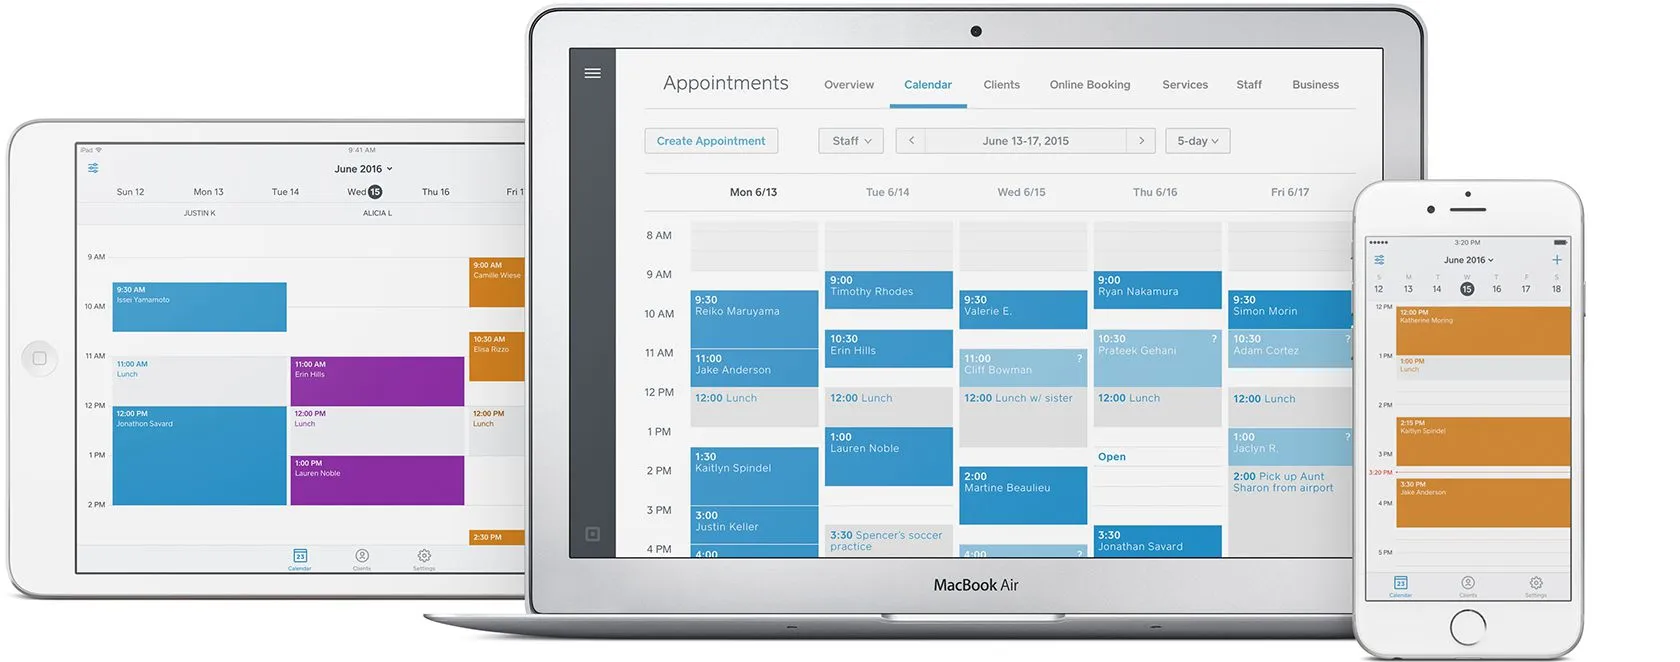 Image of an iPad, laptop, and mobile phone with Square Appointments calendar interface